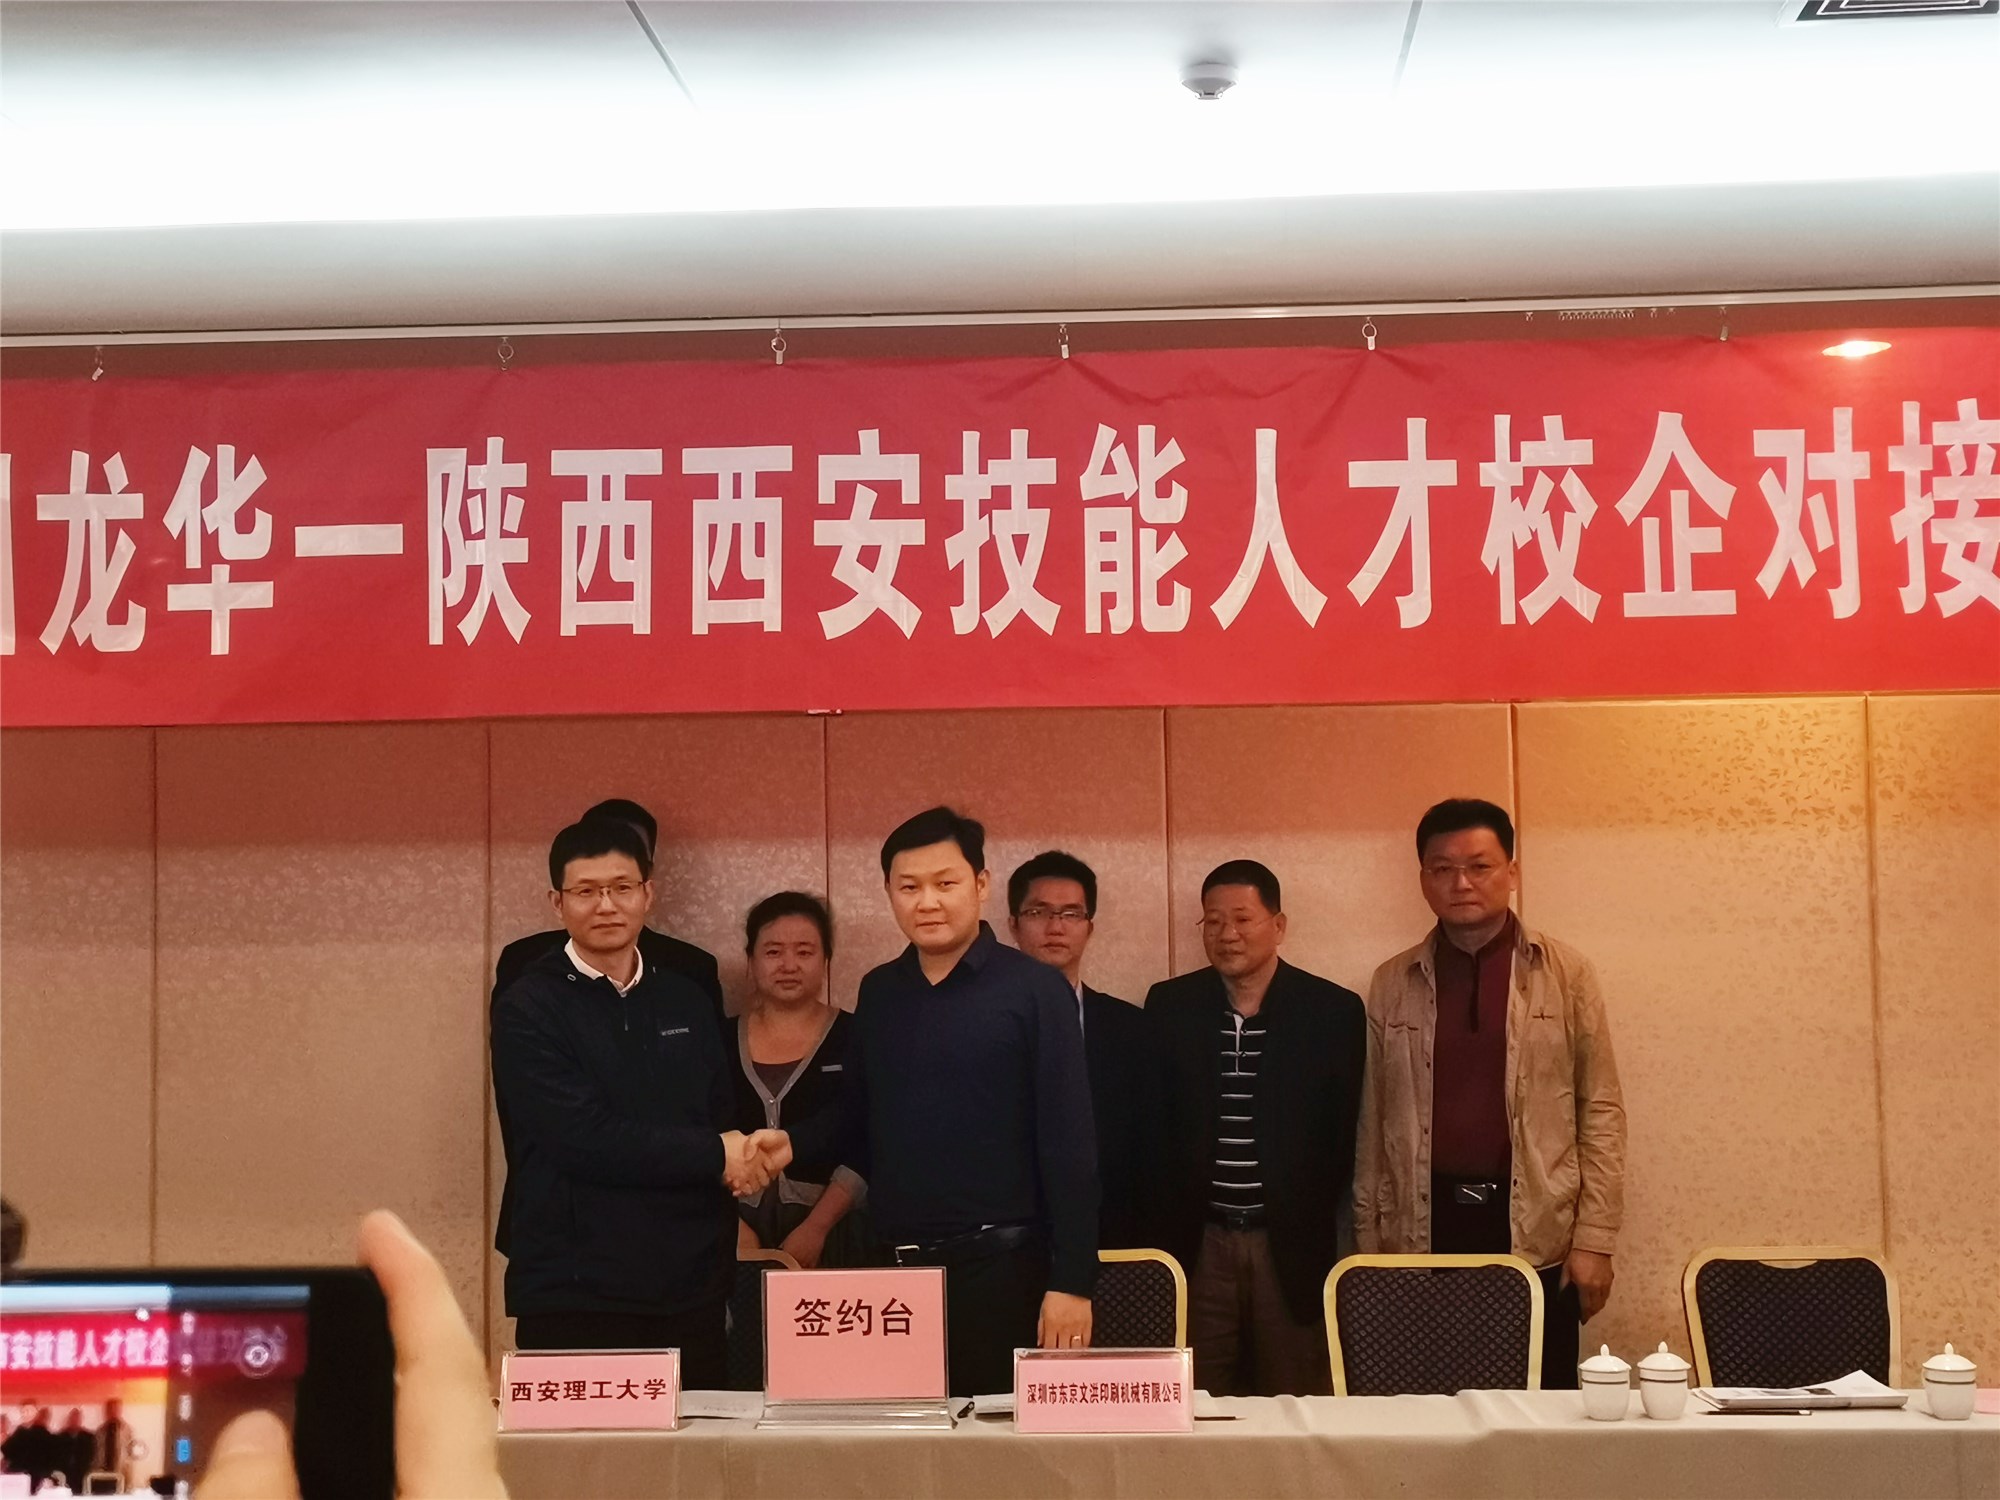 Wenhong Printing Machinery Co., Ltd. and Xi'an University of Technology officially signed a school-enterprise cooperation agreement